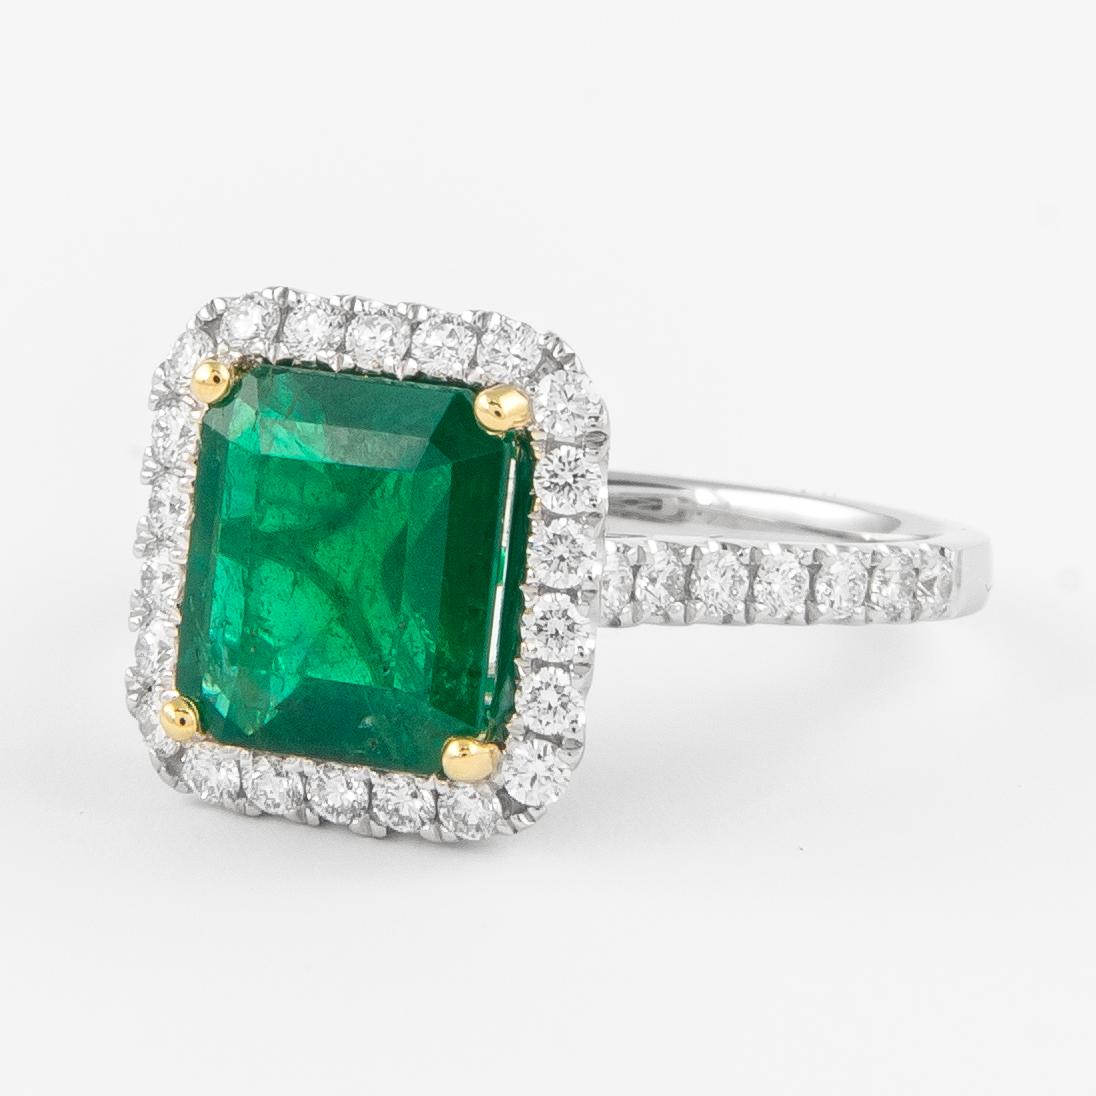 Emerald Cut GIA 3.10ctt Emerald and Diamond Halo Ring 18k Gold For Sale